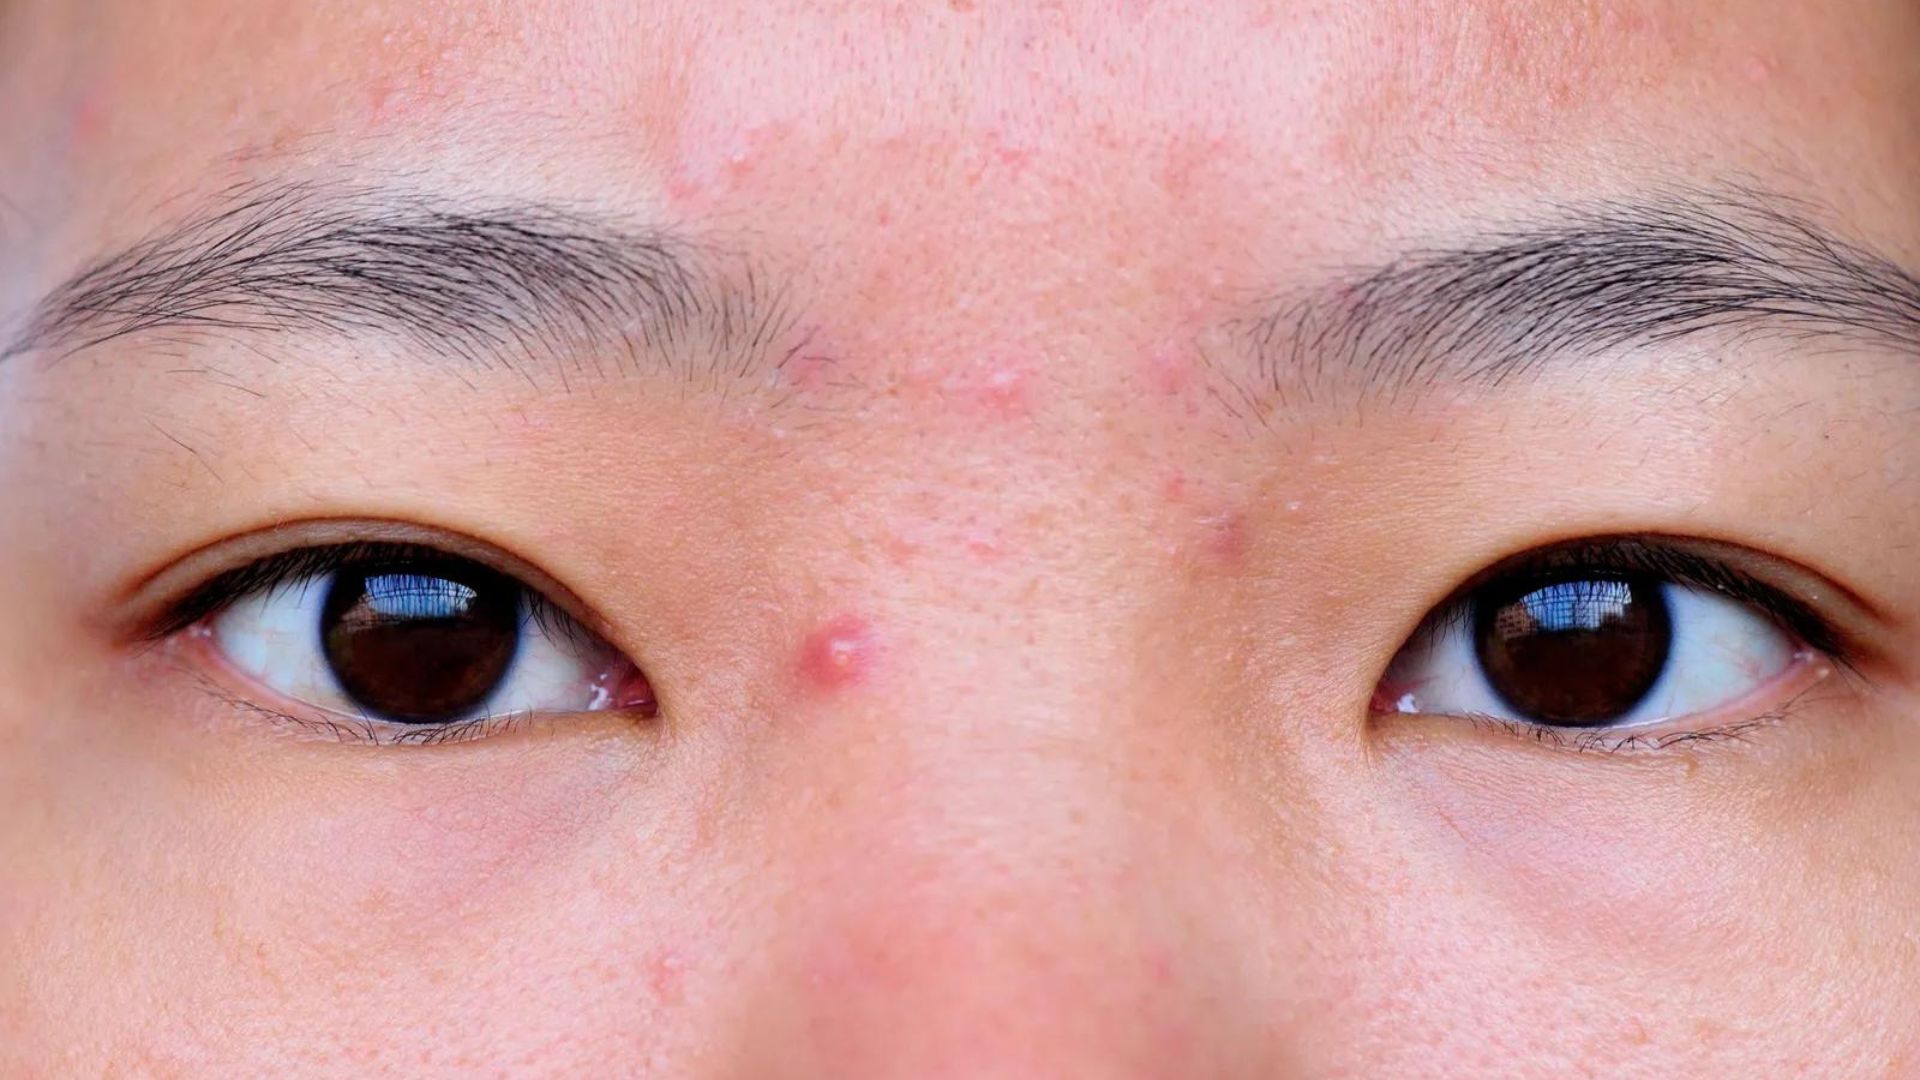 Pimples On Man's Face